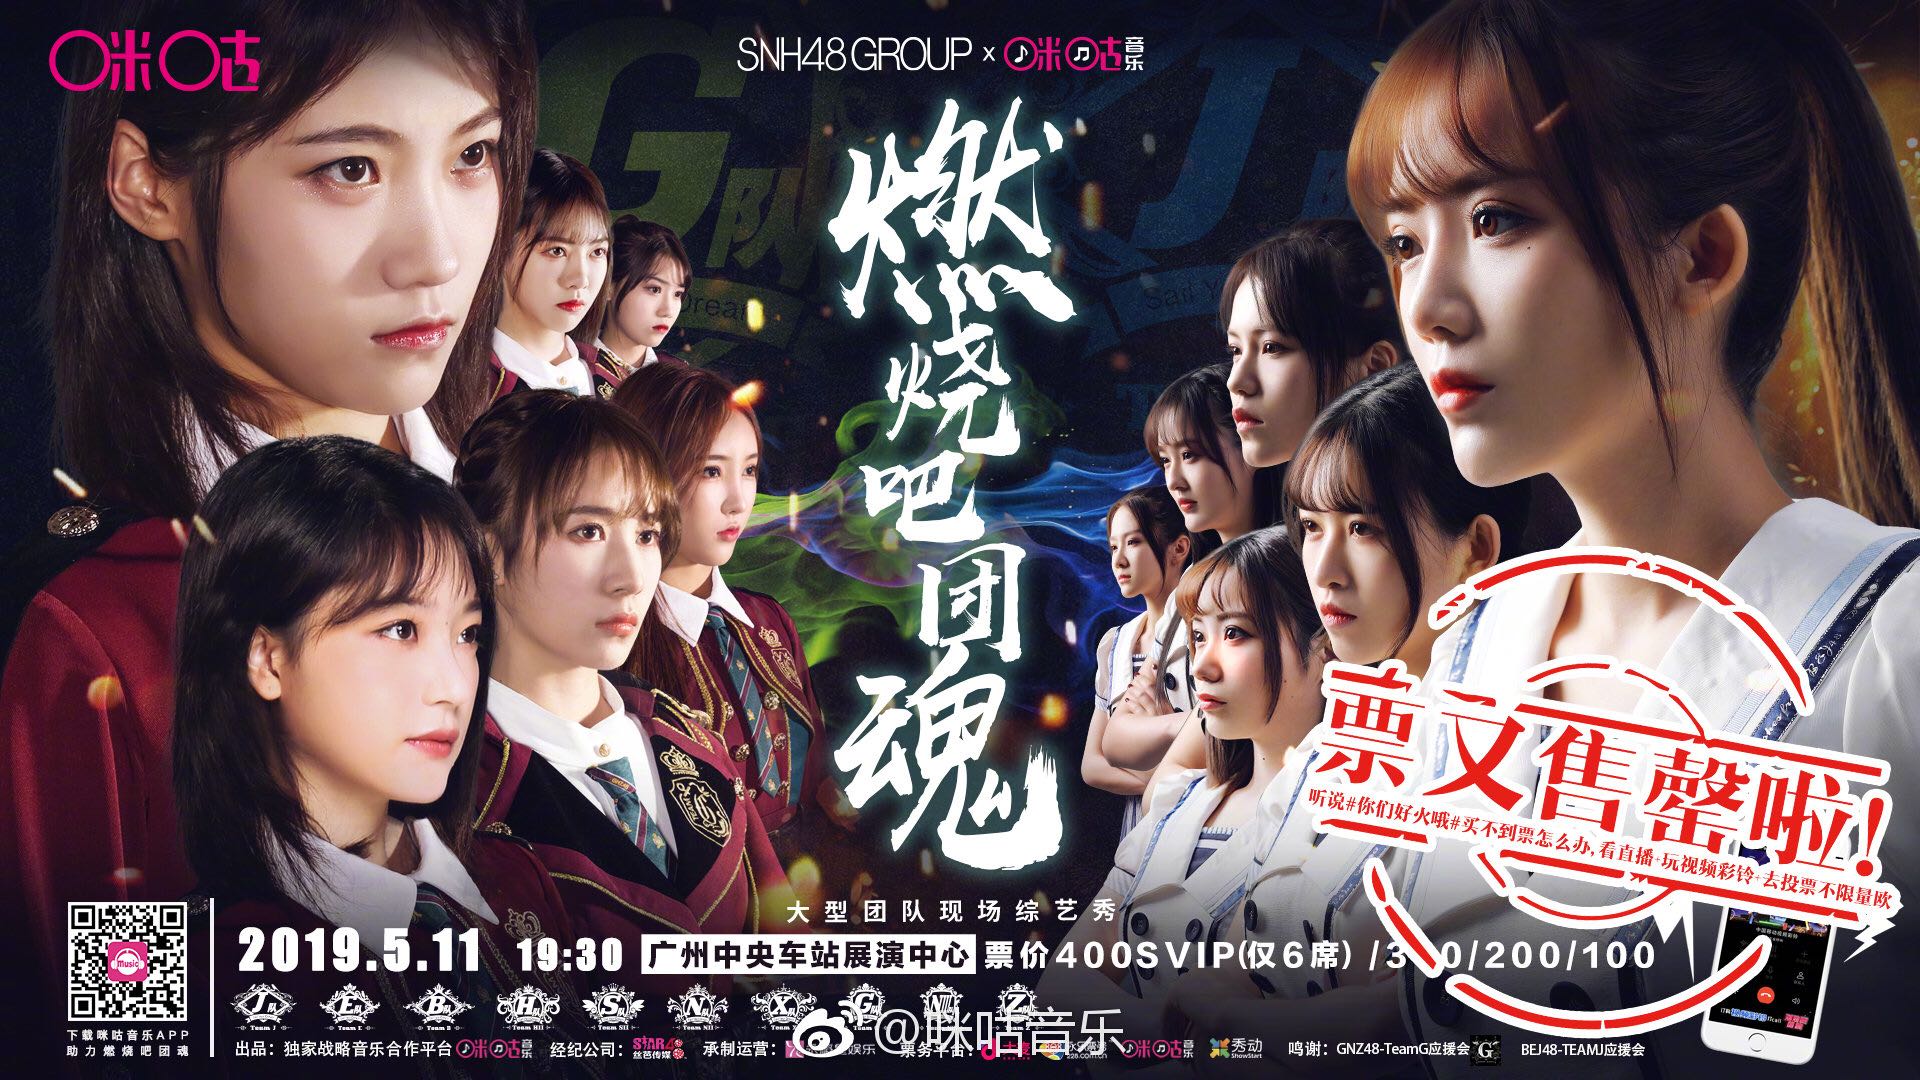 Team G Vs Team J Migu Music Tour In China Snh48 Today Images, Photos, Reviews